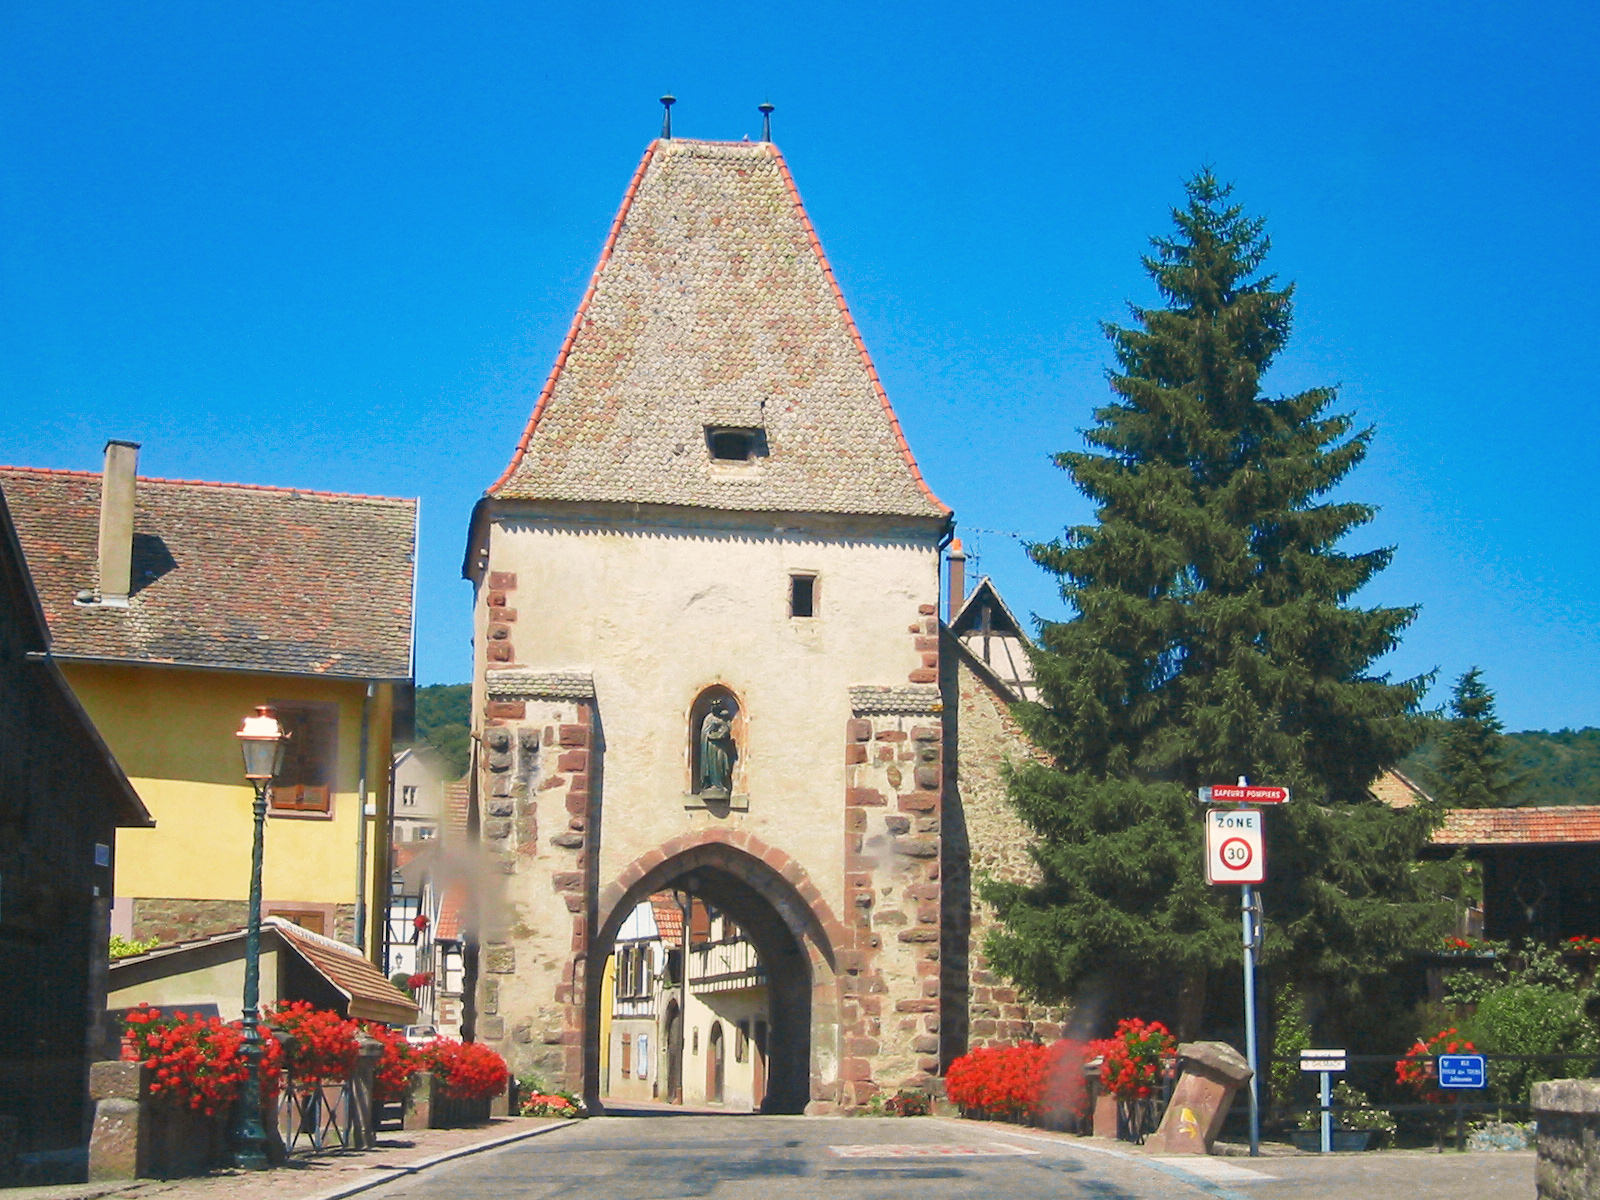 Fortified City Gates of Alsace - Tour Basse, Bœrsch © David Pursehouse - licence [CC BY 2.0] from Wikimedia Commons